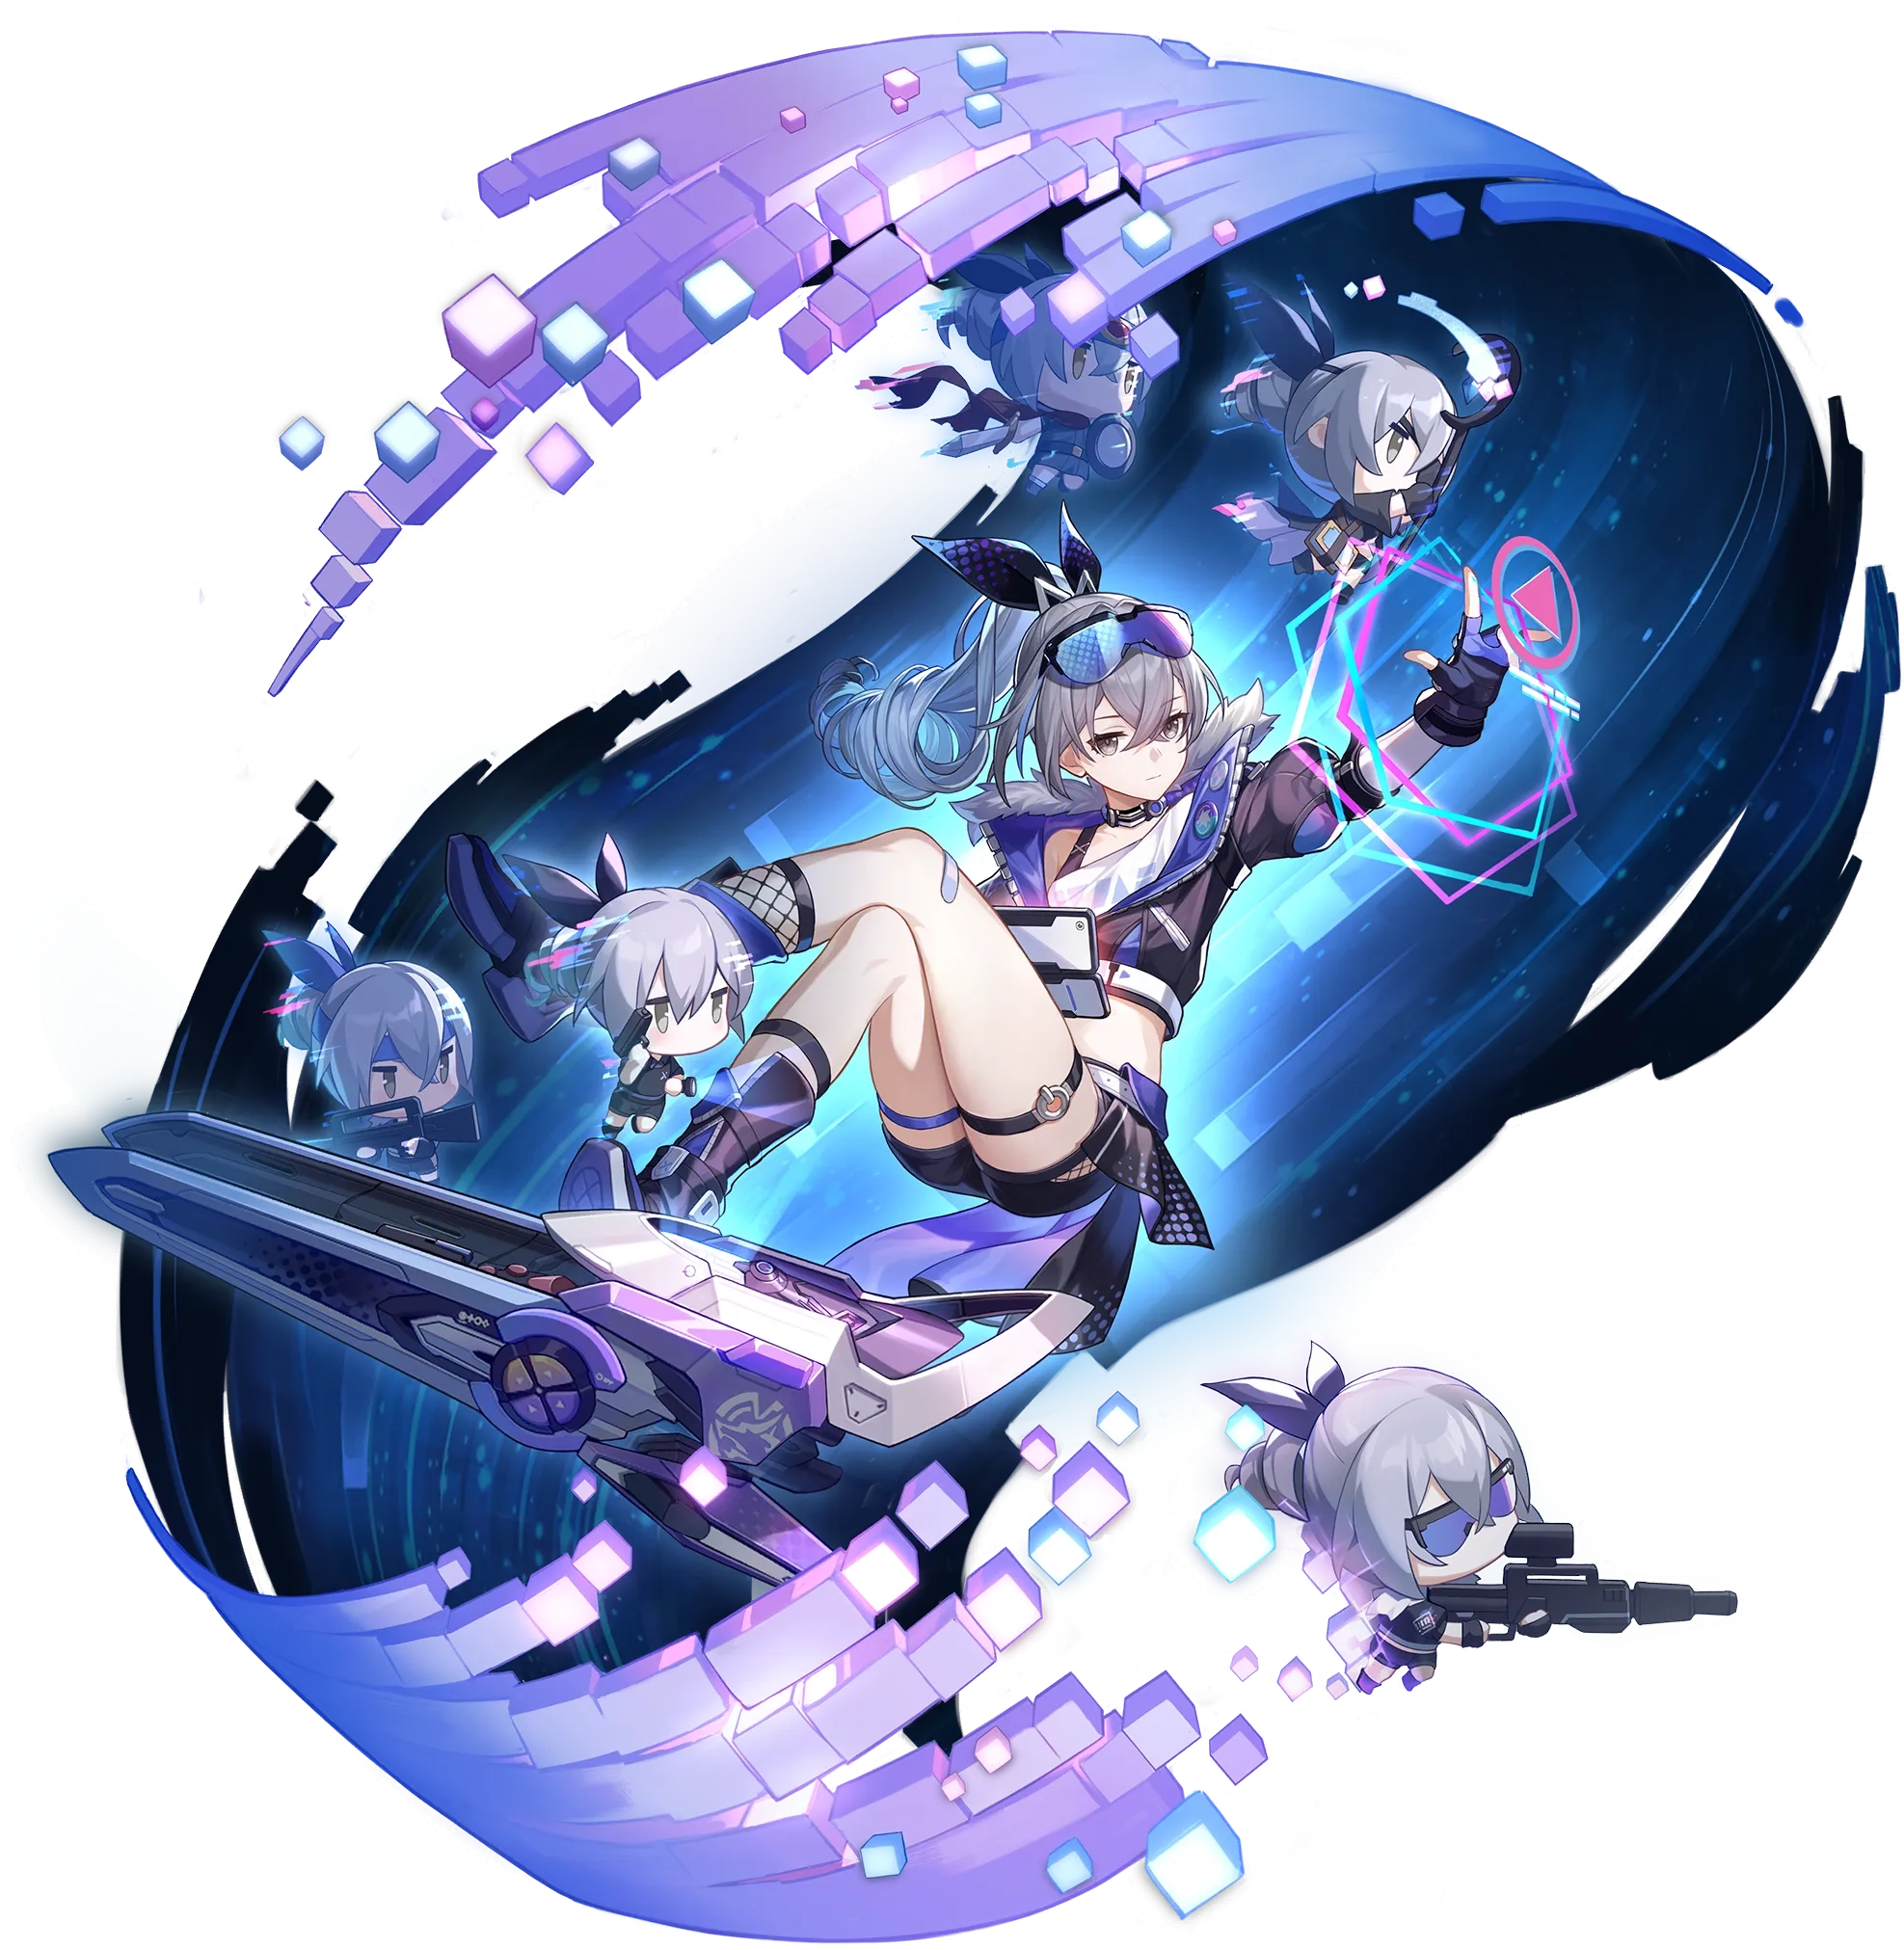 Honkai Star Rail 1.1 Banner and event details